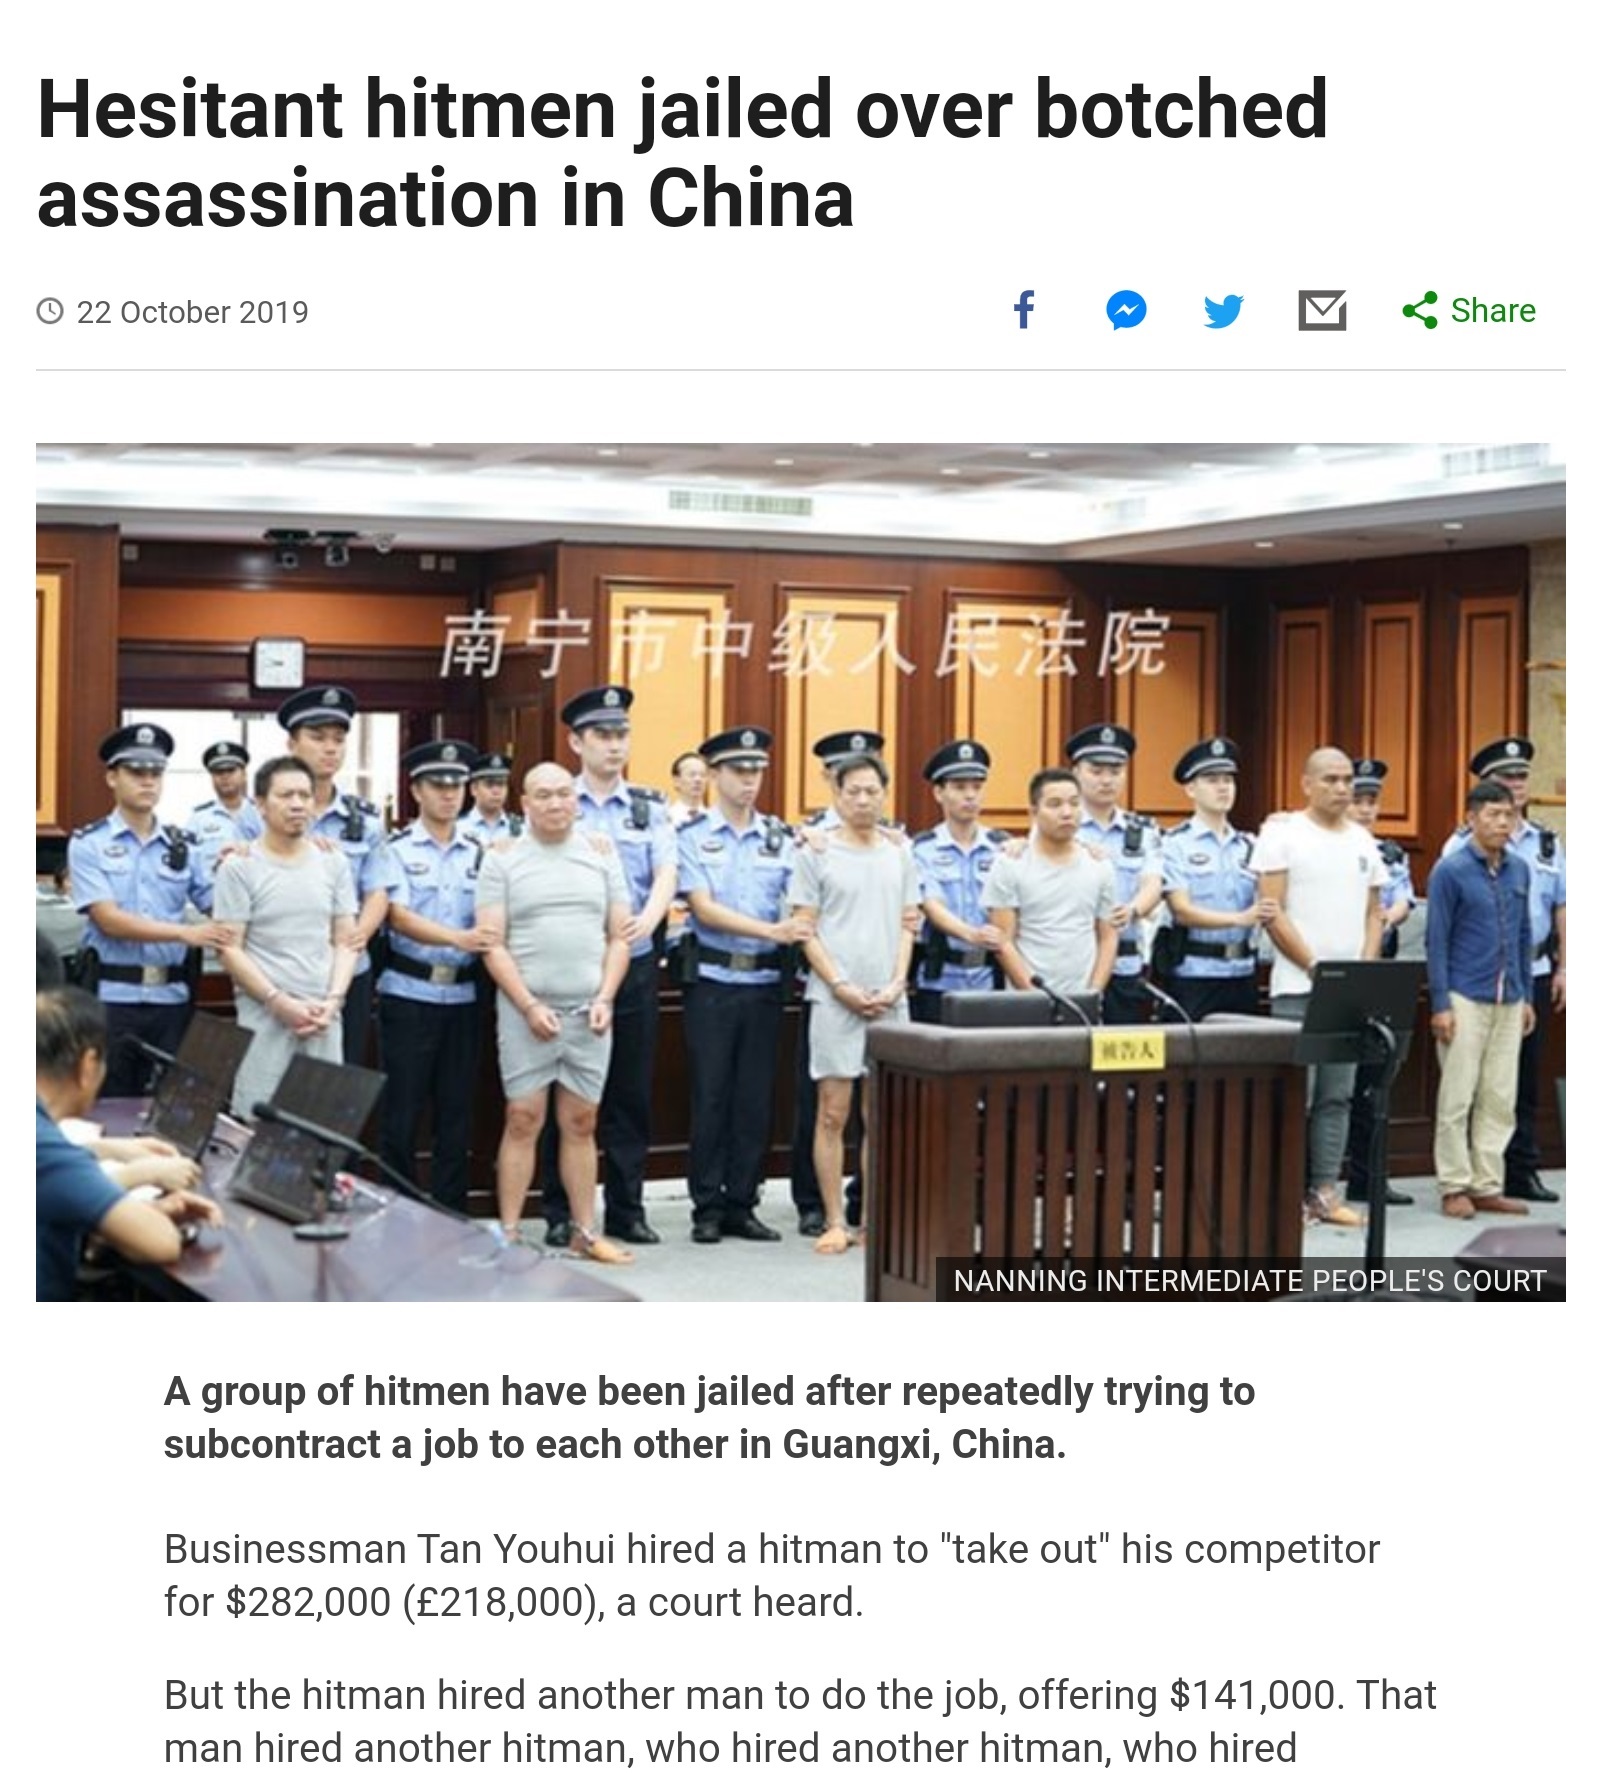 presentation - Hesitant hitmen jailed over botched assassination in China f y 17 Nanning Intermediate People'S Court A group of hitmen have been jailed after repeatedly trying to subcontract a job to each other in Guangxi, China. Businessman Tan Youhui hi